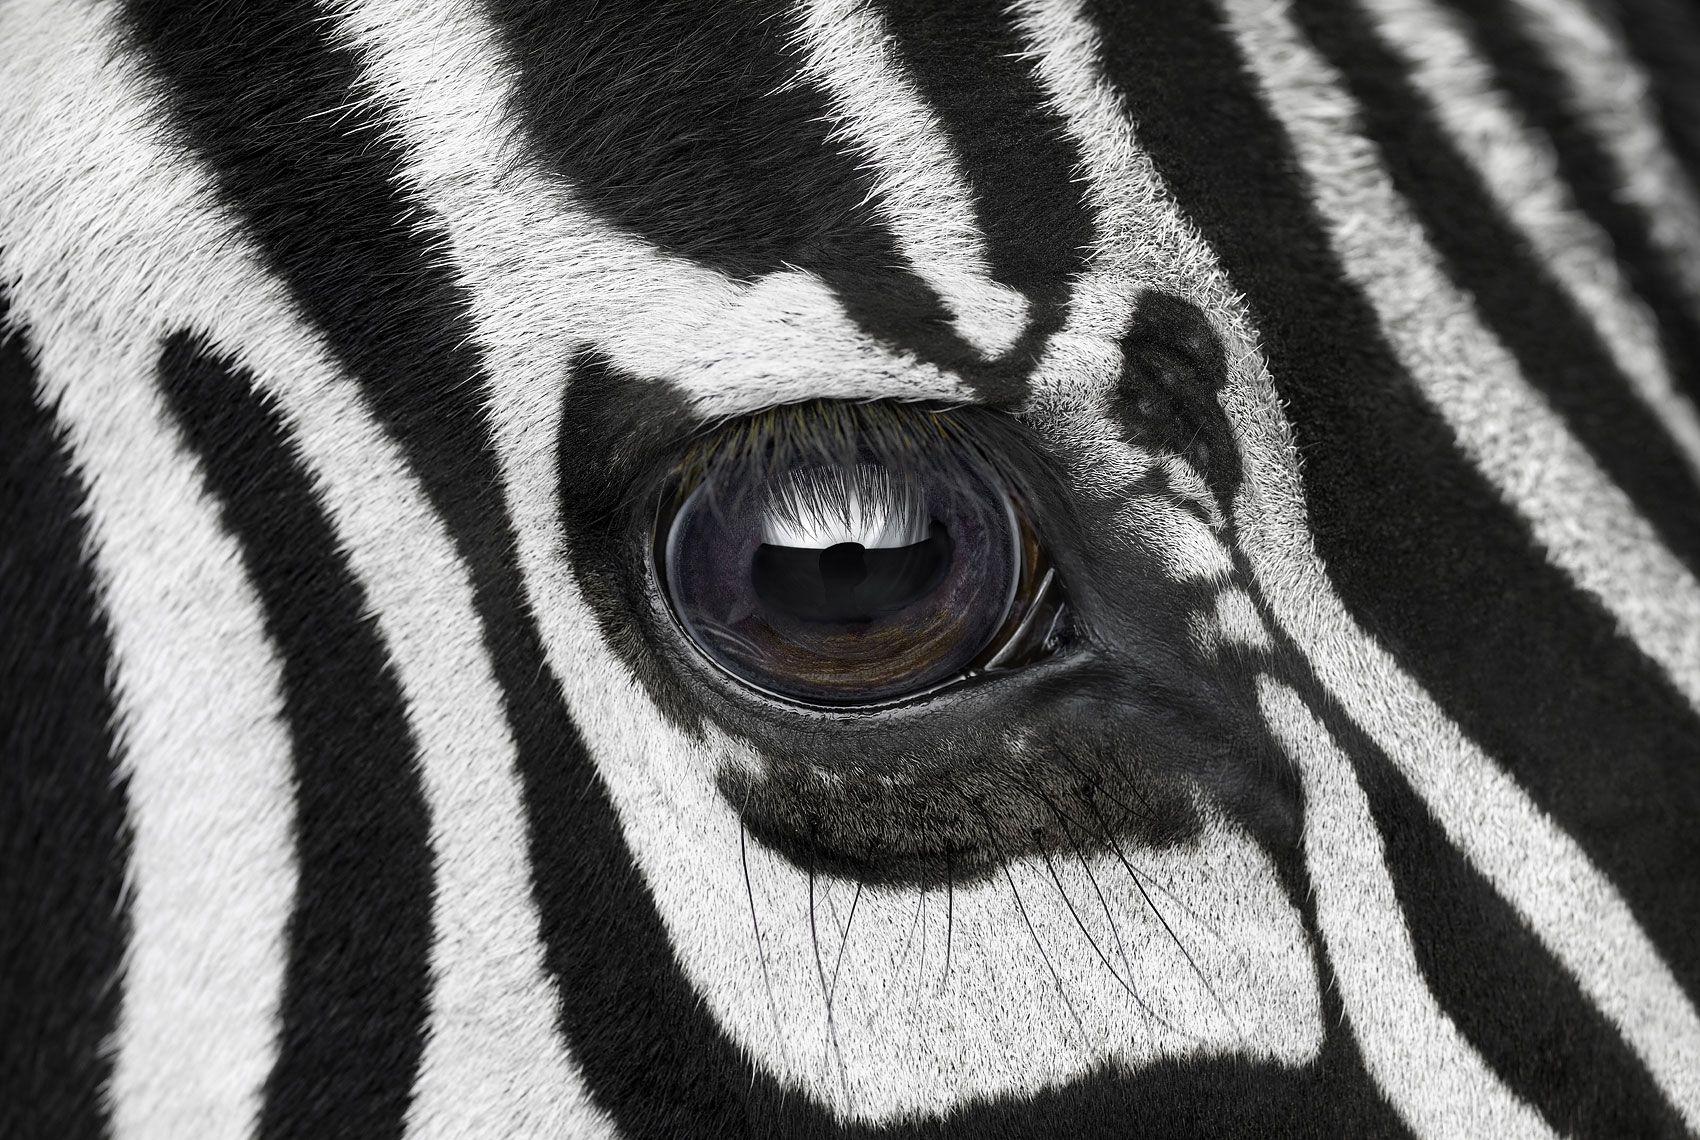 'Zebra #7, Los Angeles, CA, 2016' is a limited-edition photograph by contemporary artist Brad Wilson from the ‘Affinity’ series which features studio portraits of wild animals. 

This photograph is sold unframed as a print only. It is available in 4